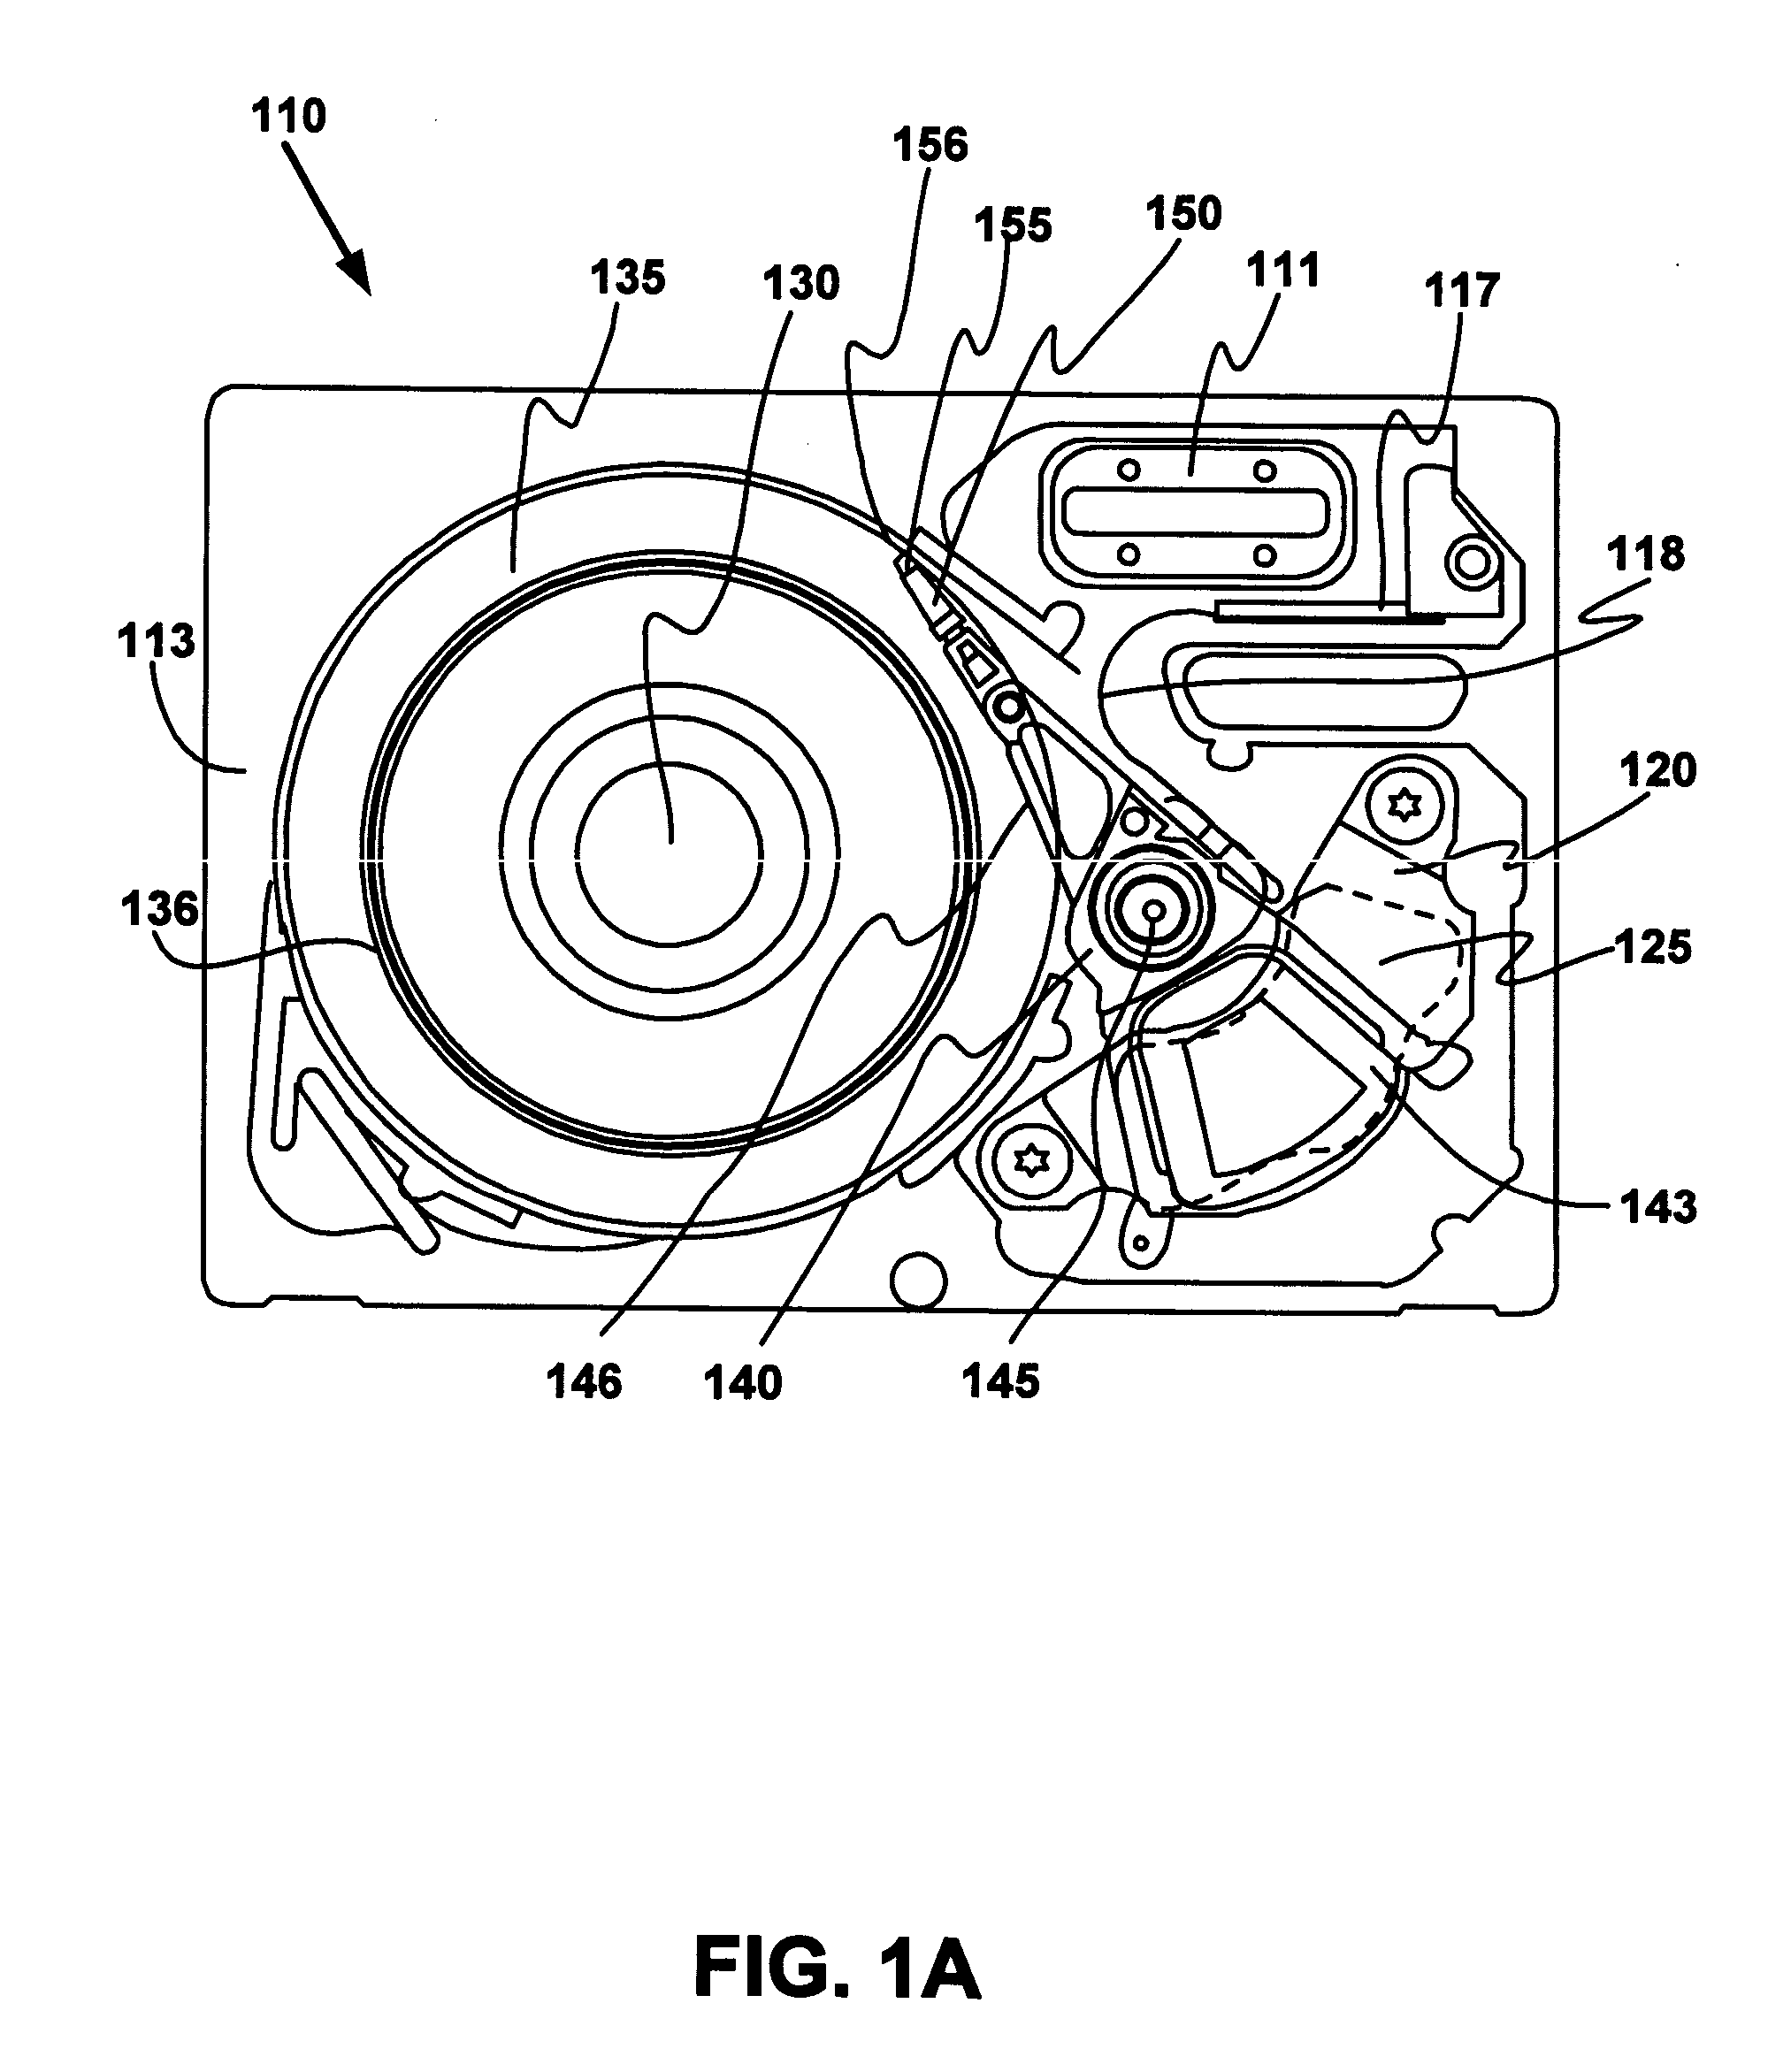 Hermetically sealed head disk assembly and method of sealing with soldering material